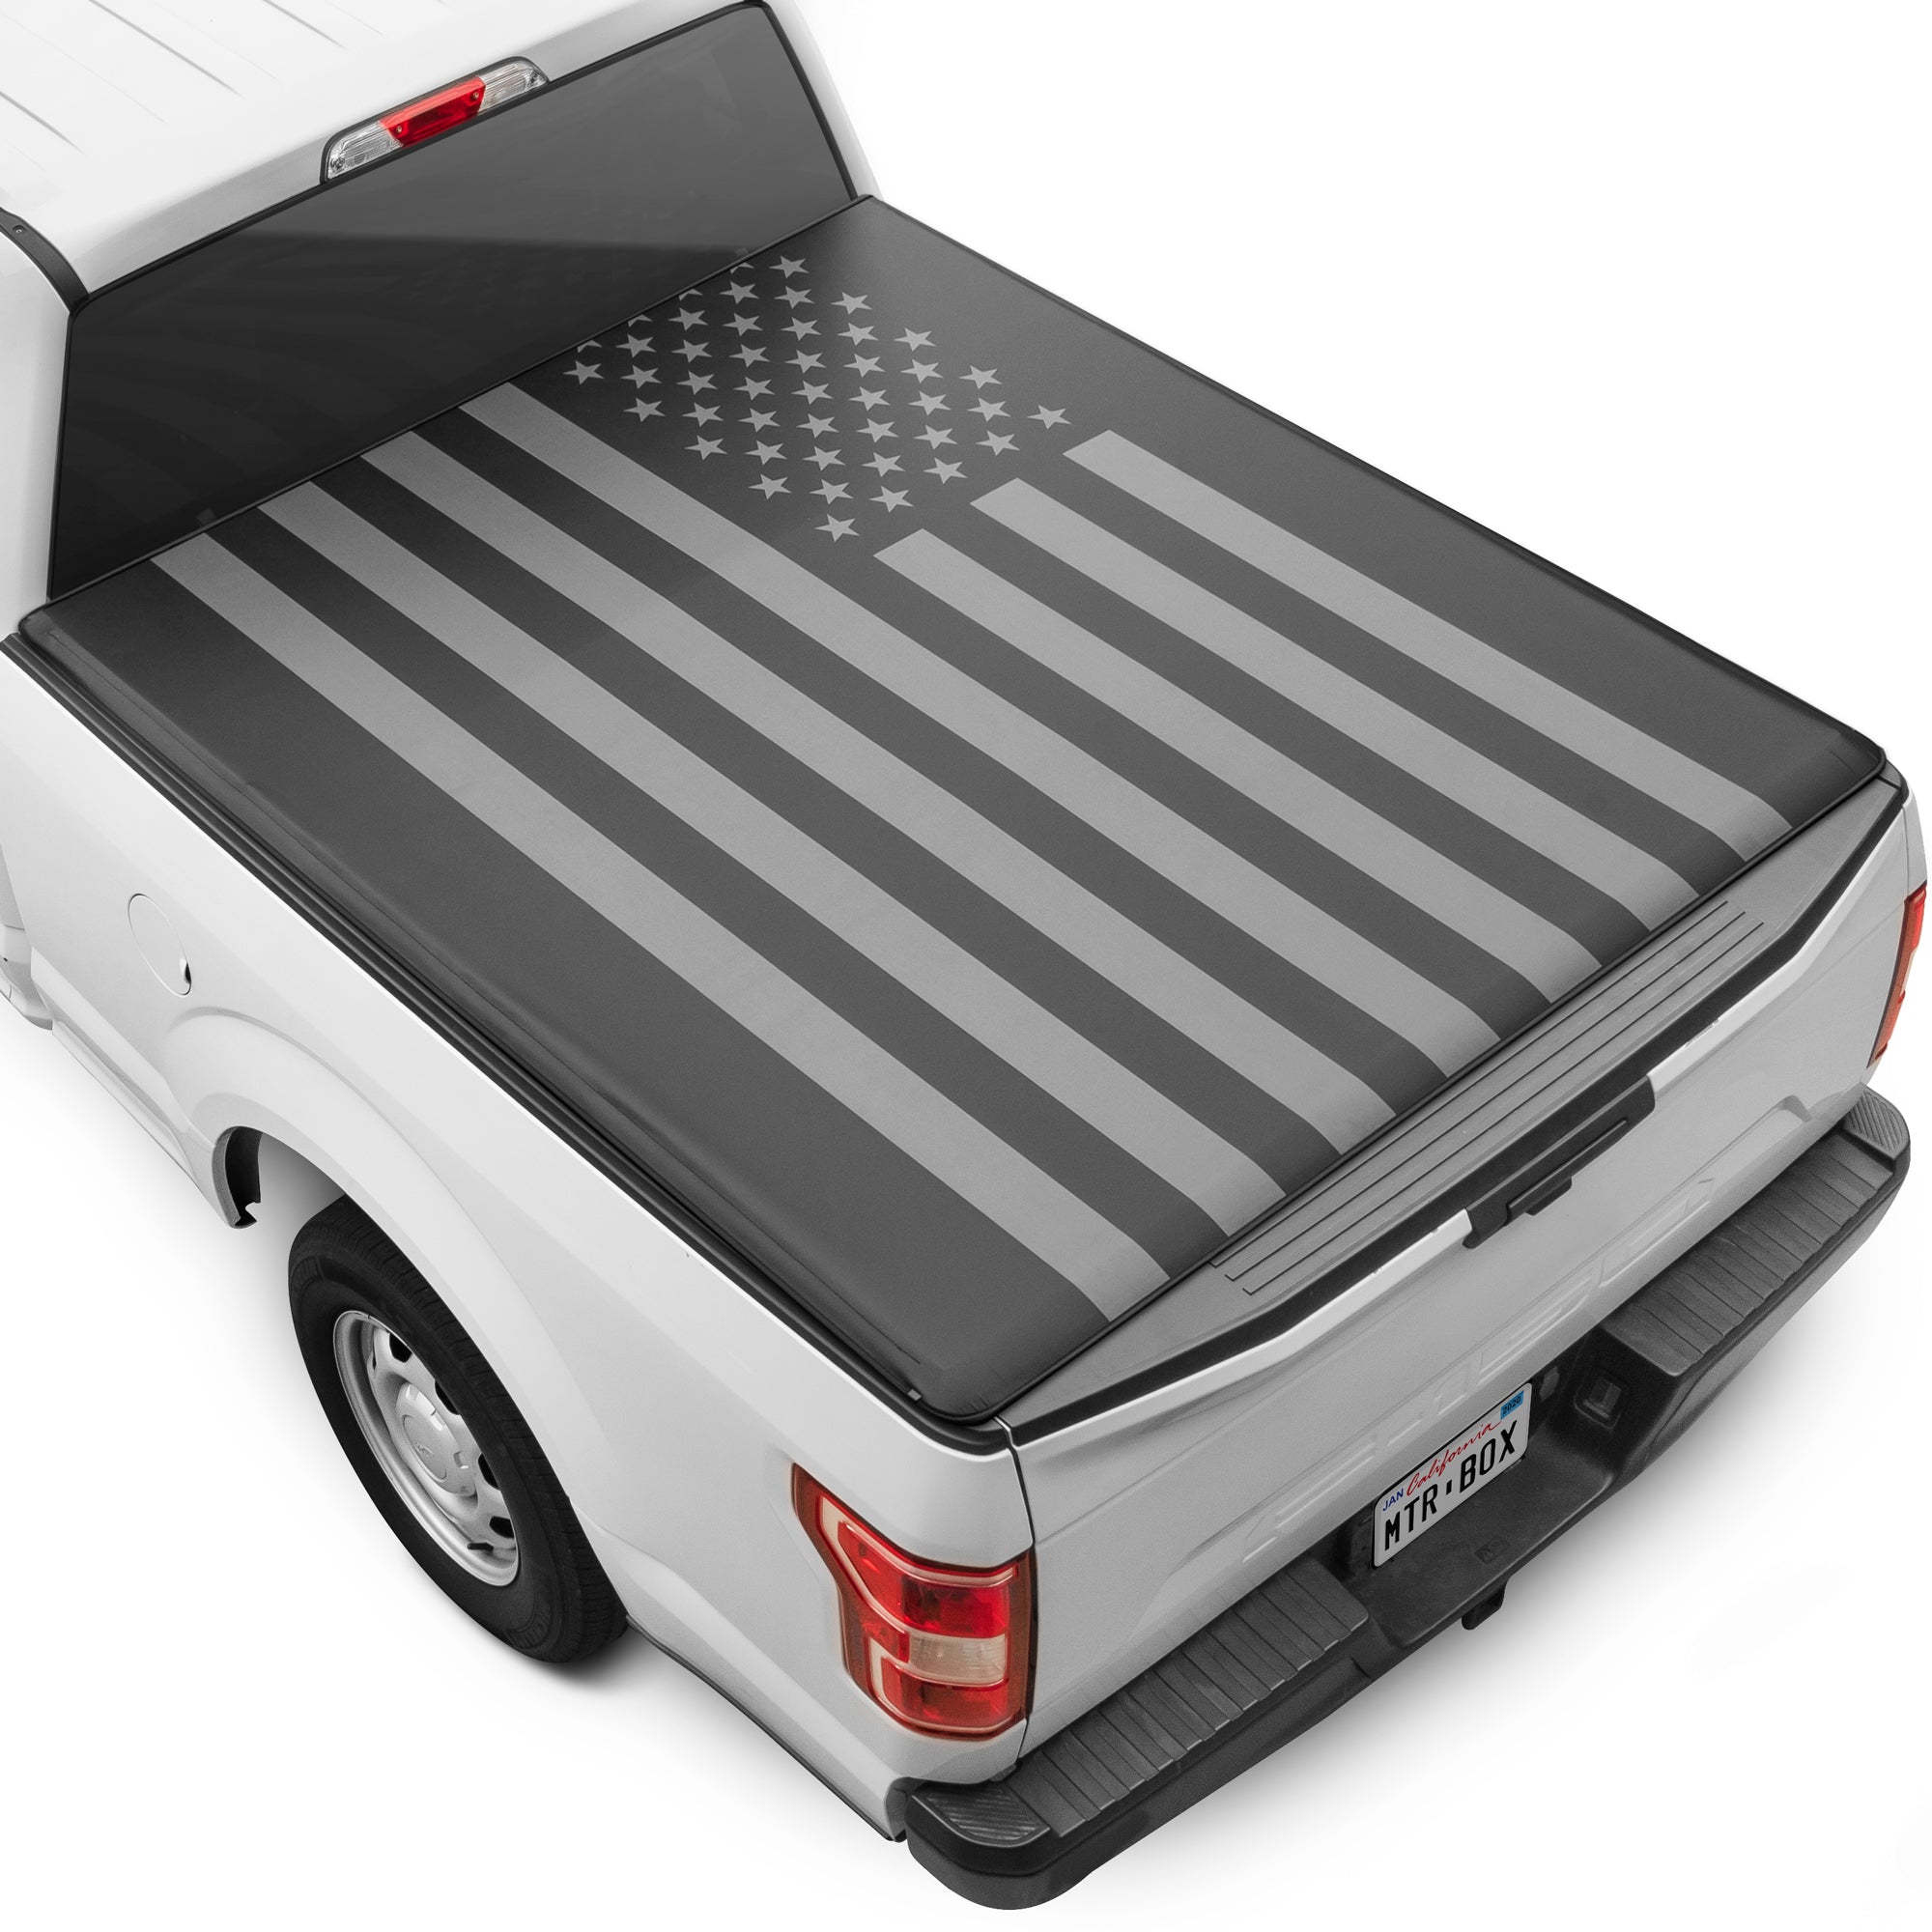 Black Flag Tonneau Cover Soft Roll-up Truck Bed Protector All Weather Retractable for Ram 1500 2002-2023 2500/3500 2003-2020 6.4 ft Bed